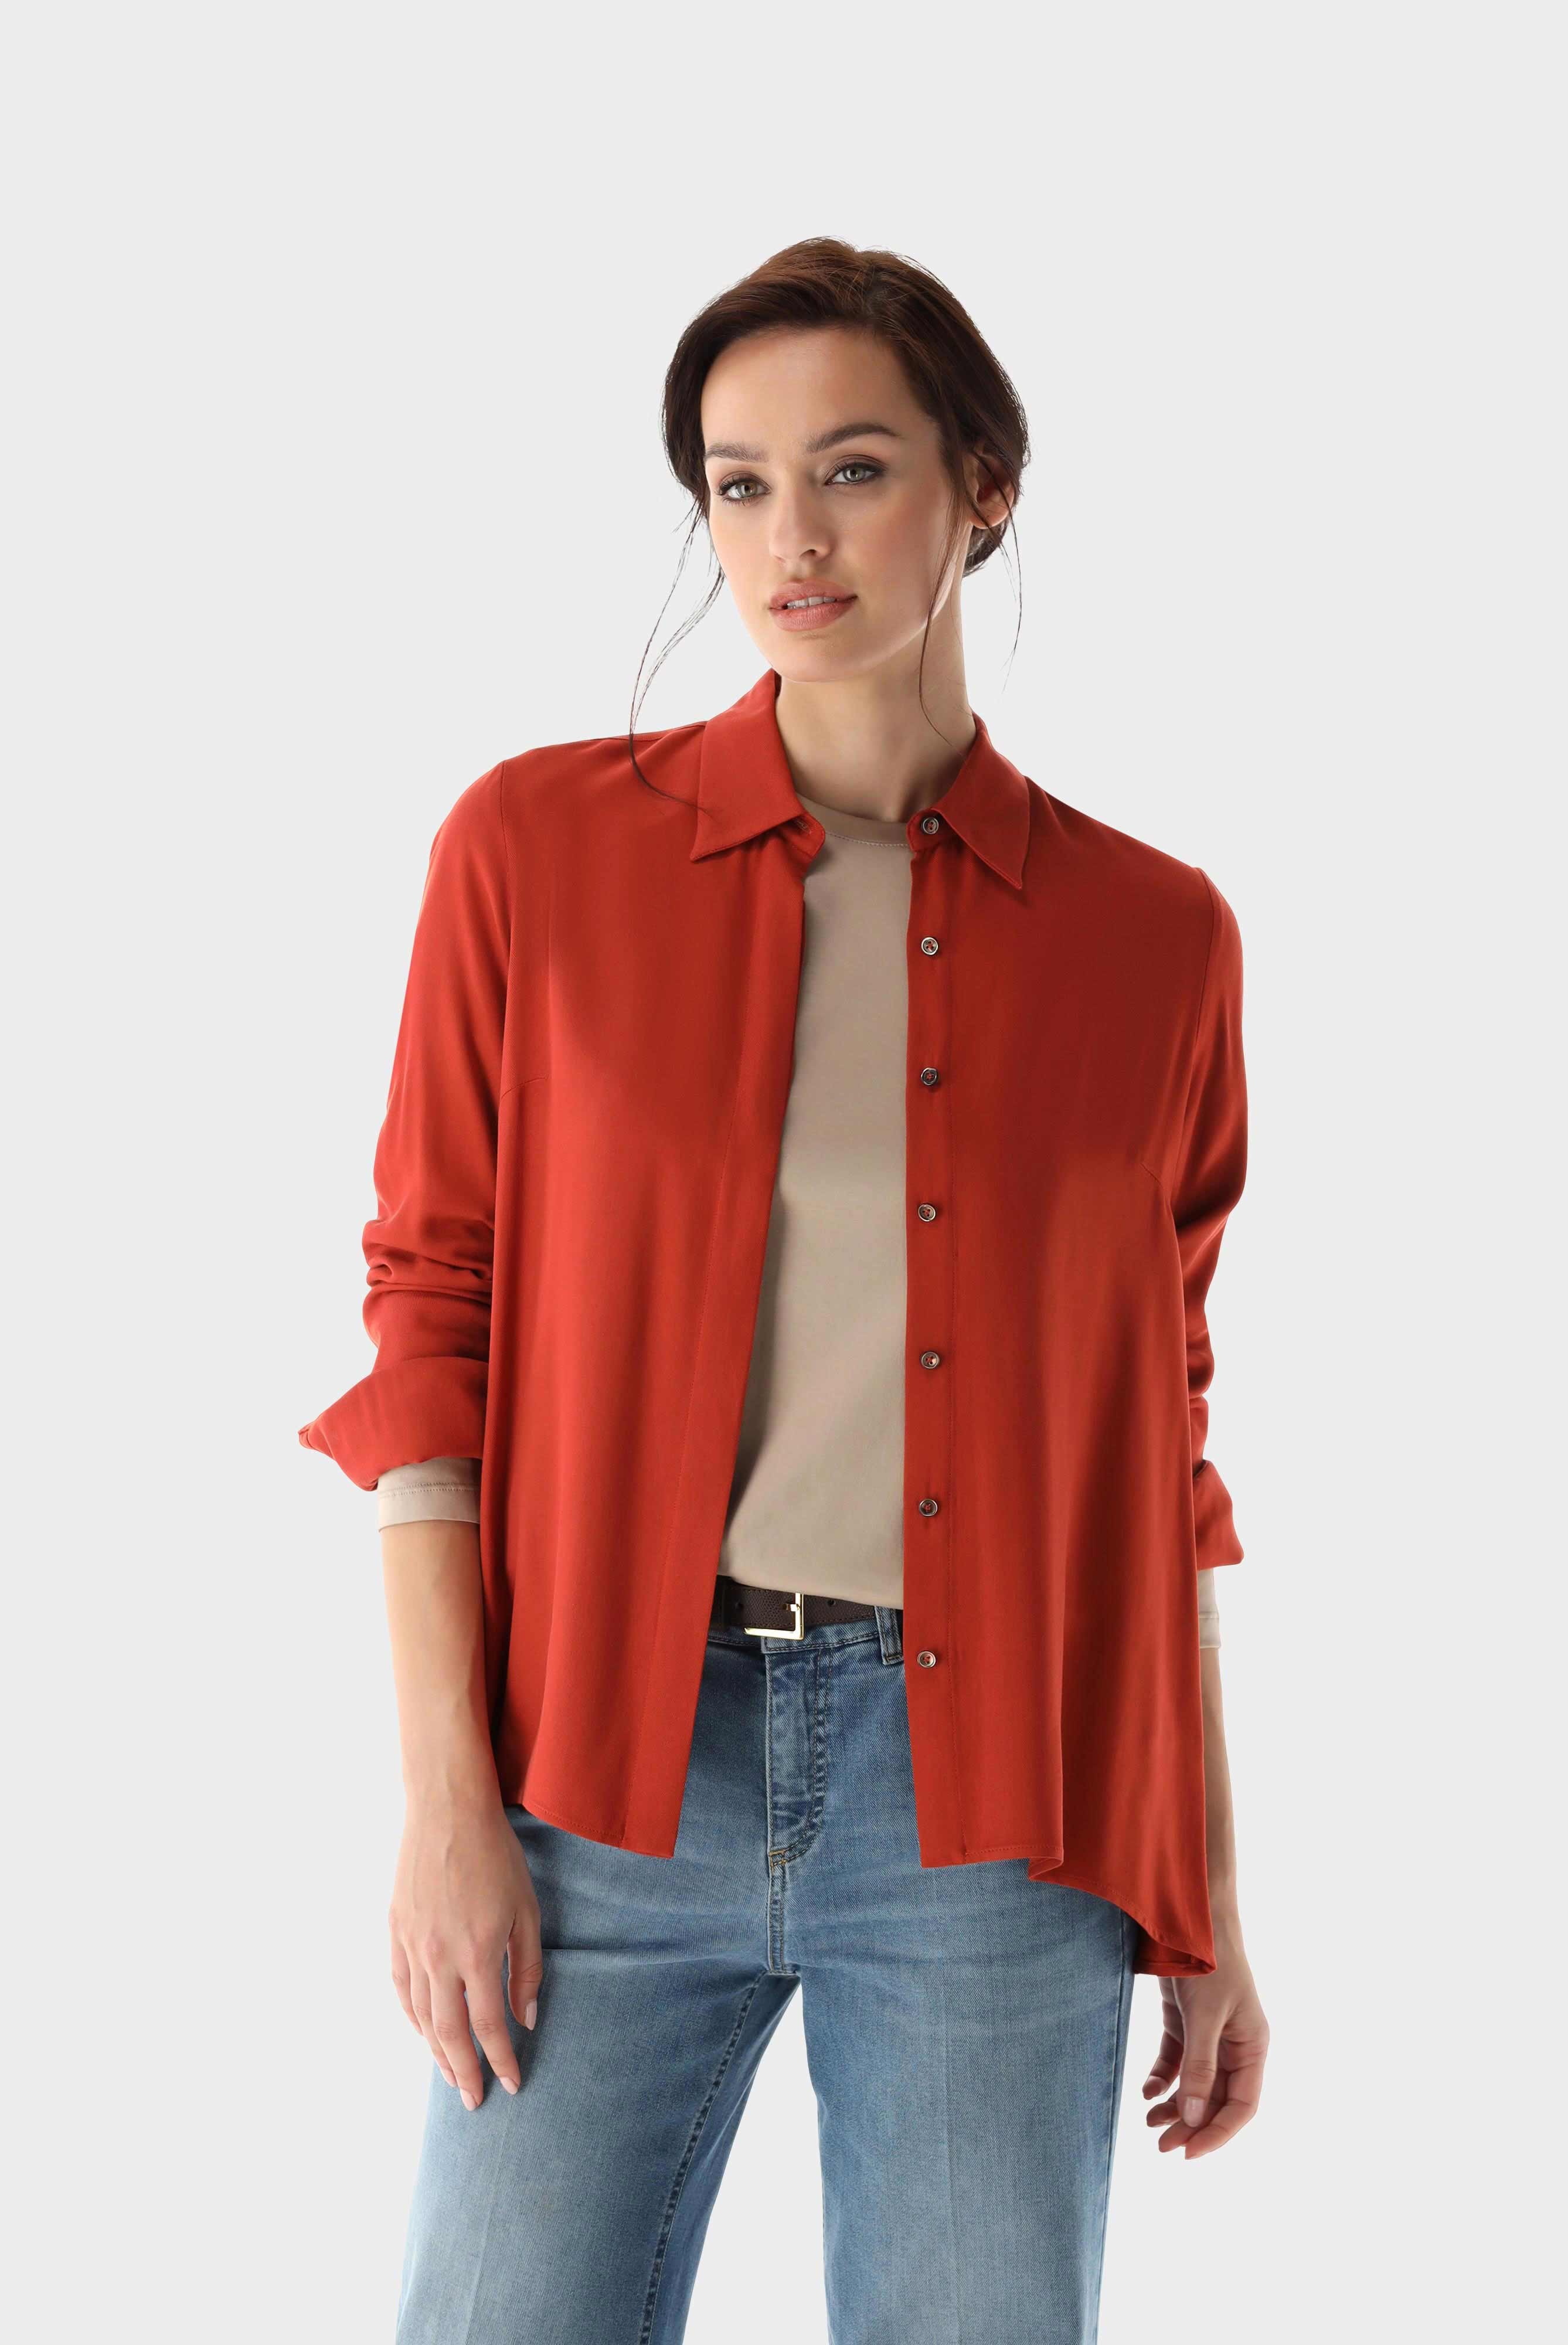 Casual Blouses+Viscose Twill Shirt Blouse+05.527R.49.150269.360.34